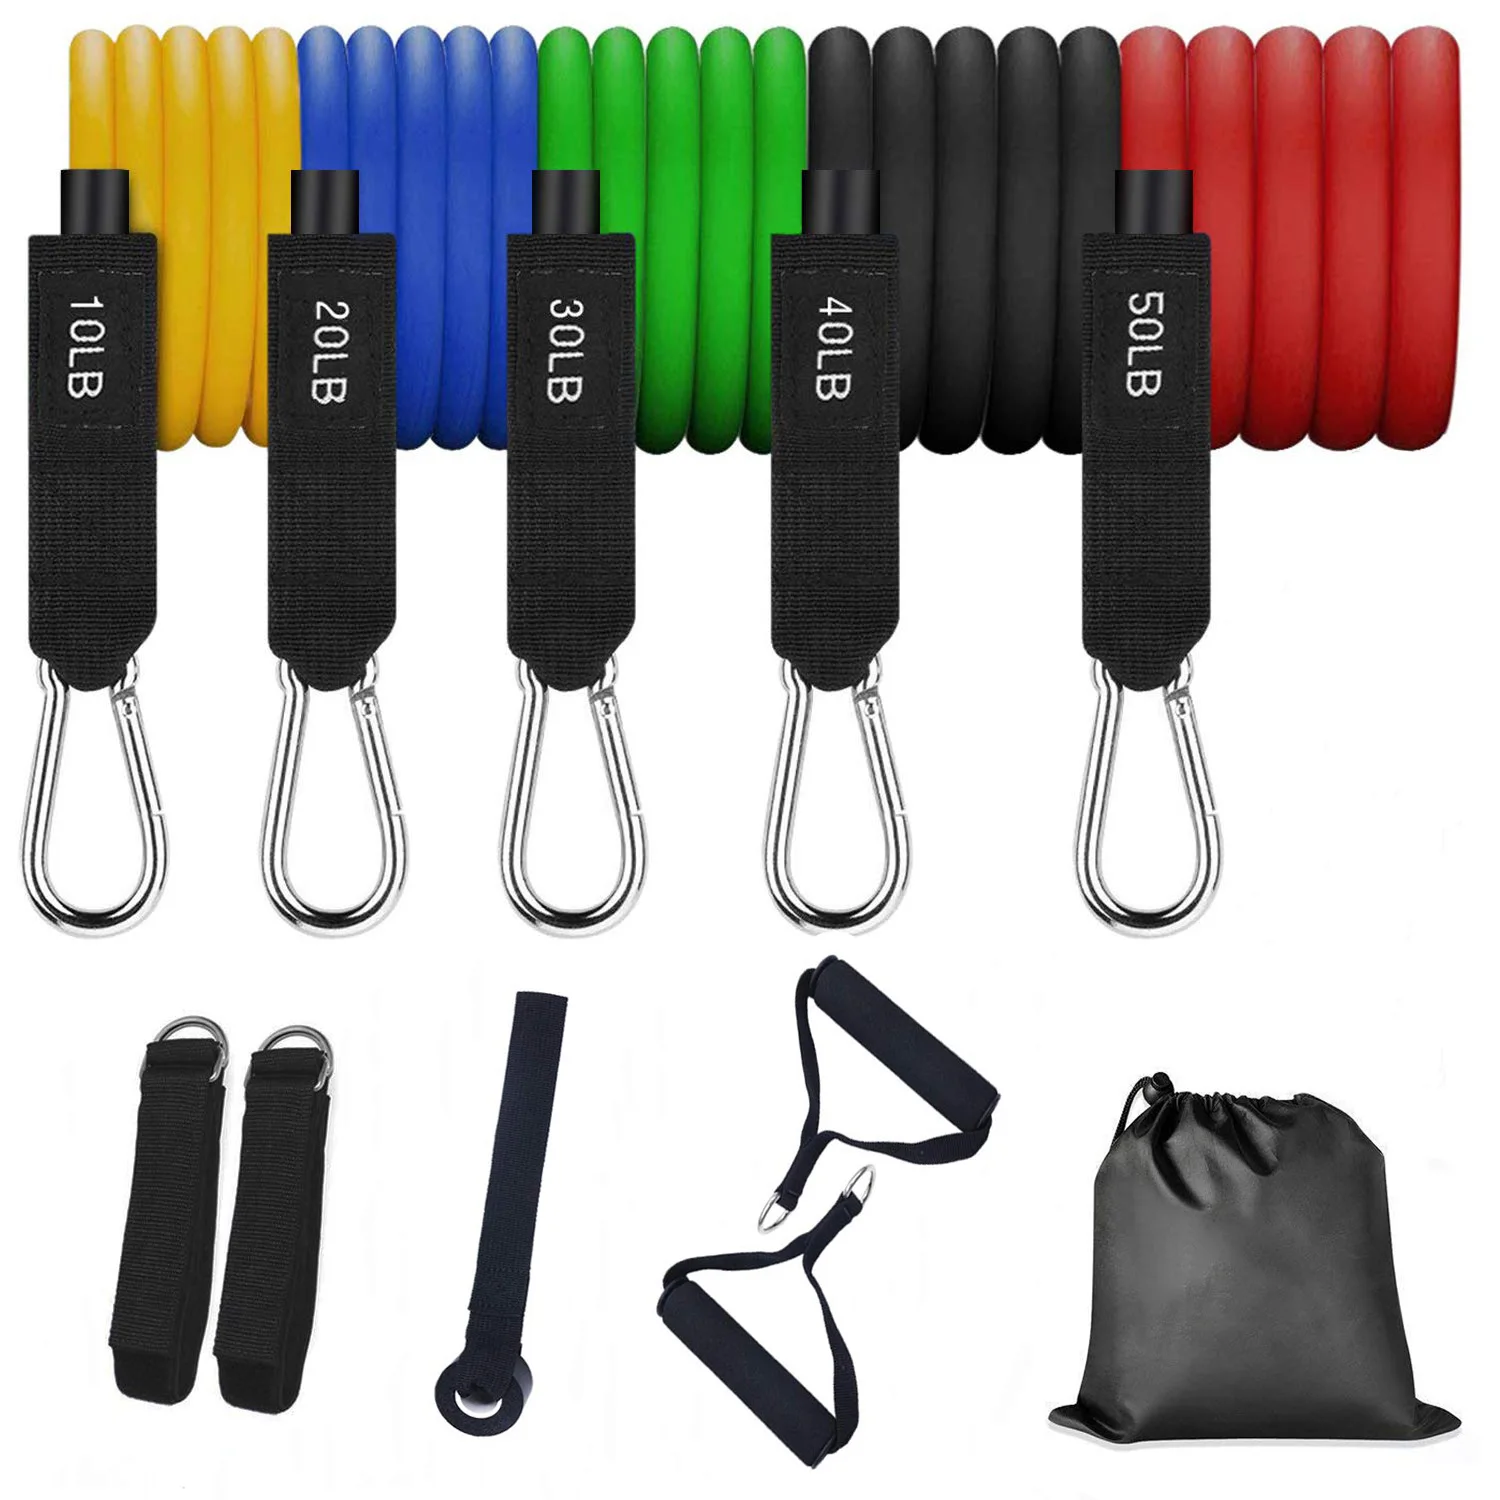 

150LBS Home Fitness Resistance Bands Exercise Elastic Pull Ropes Exercise TPE Resistance Bands 11PCS Set, Customized color